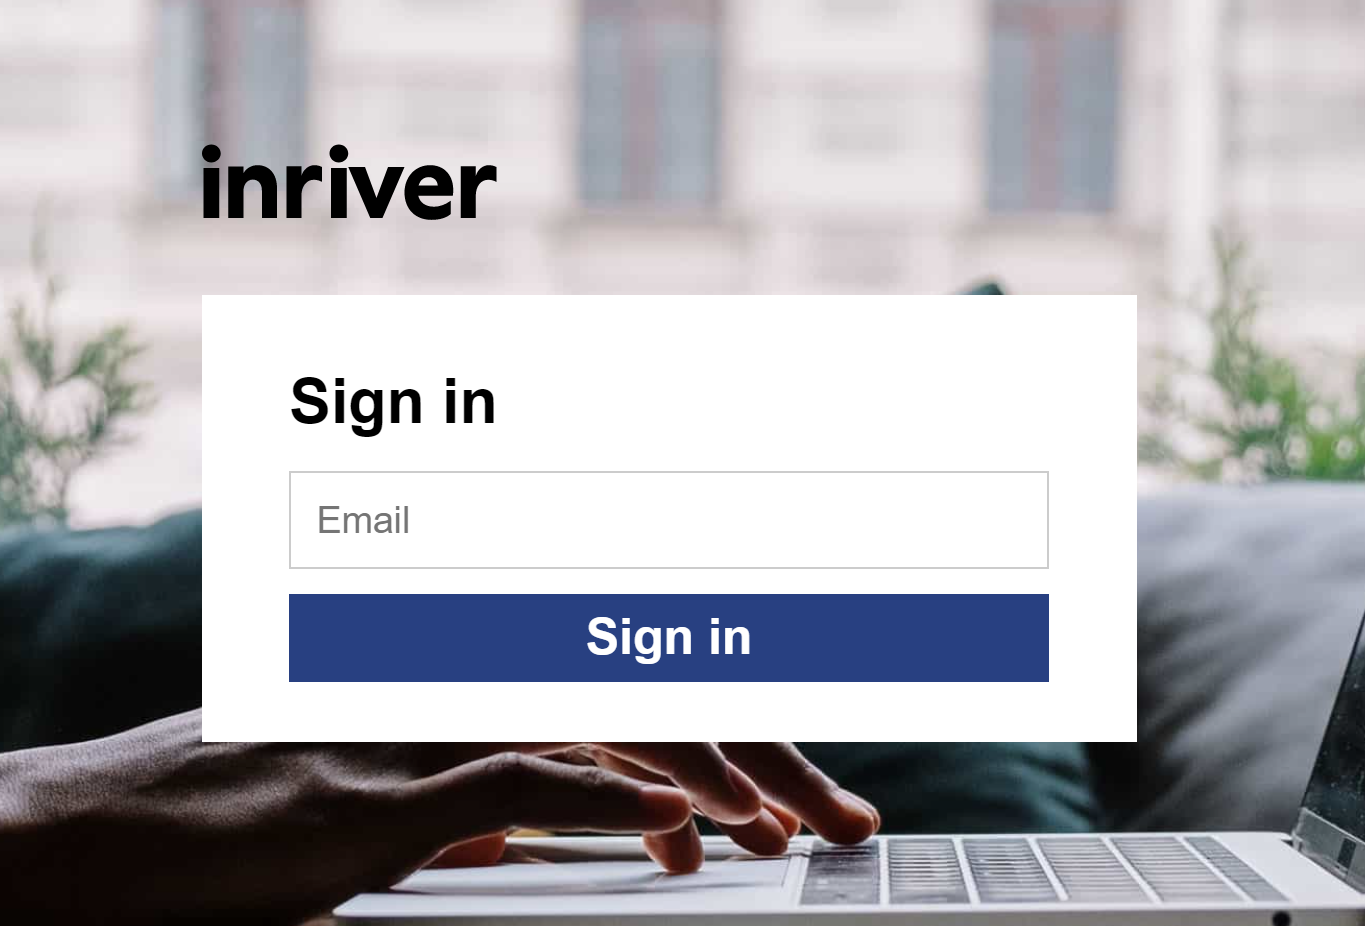 sign_in_to_inriver.png